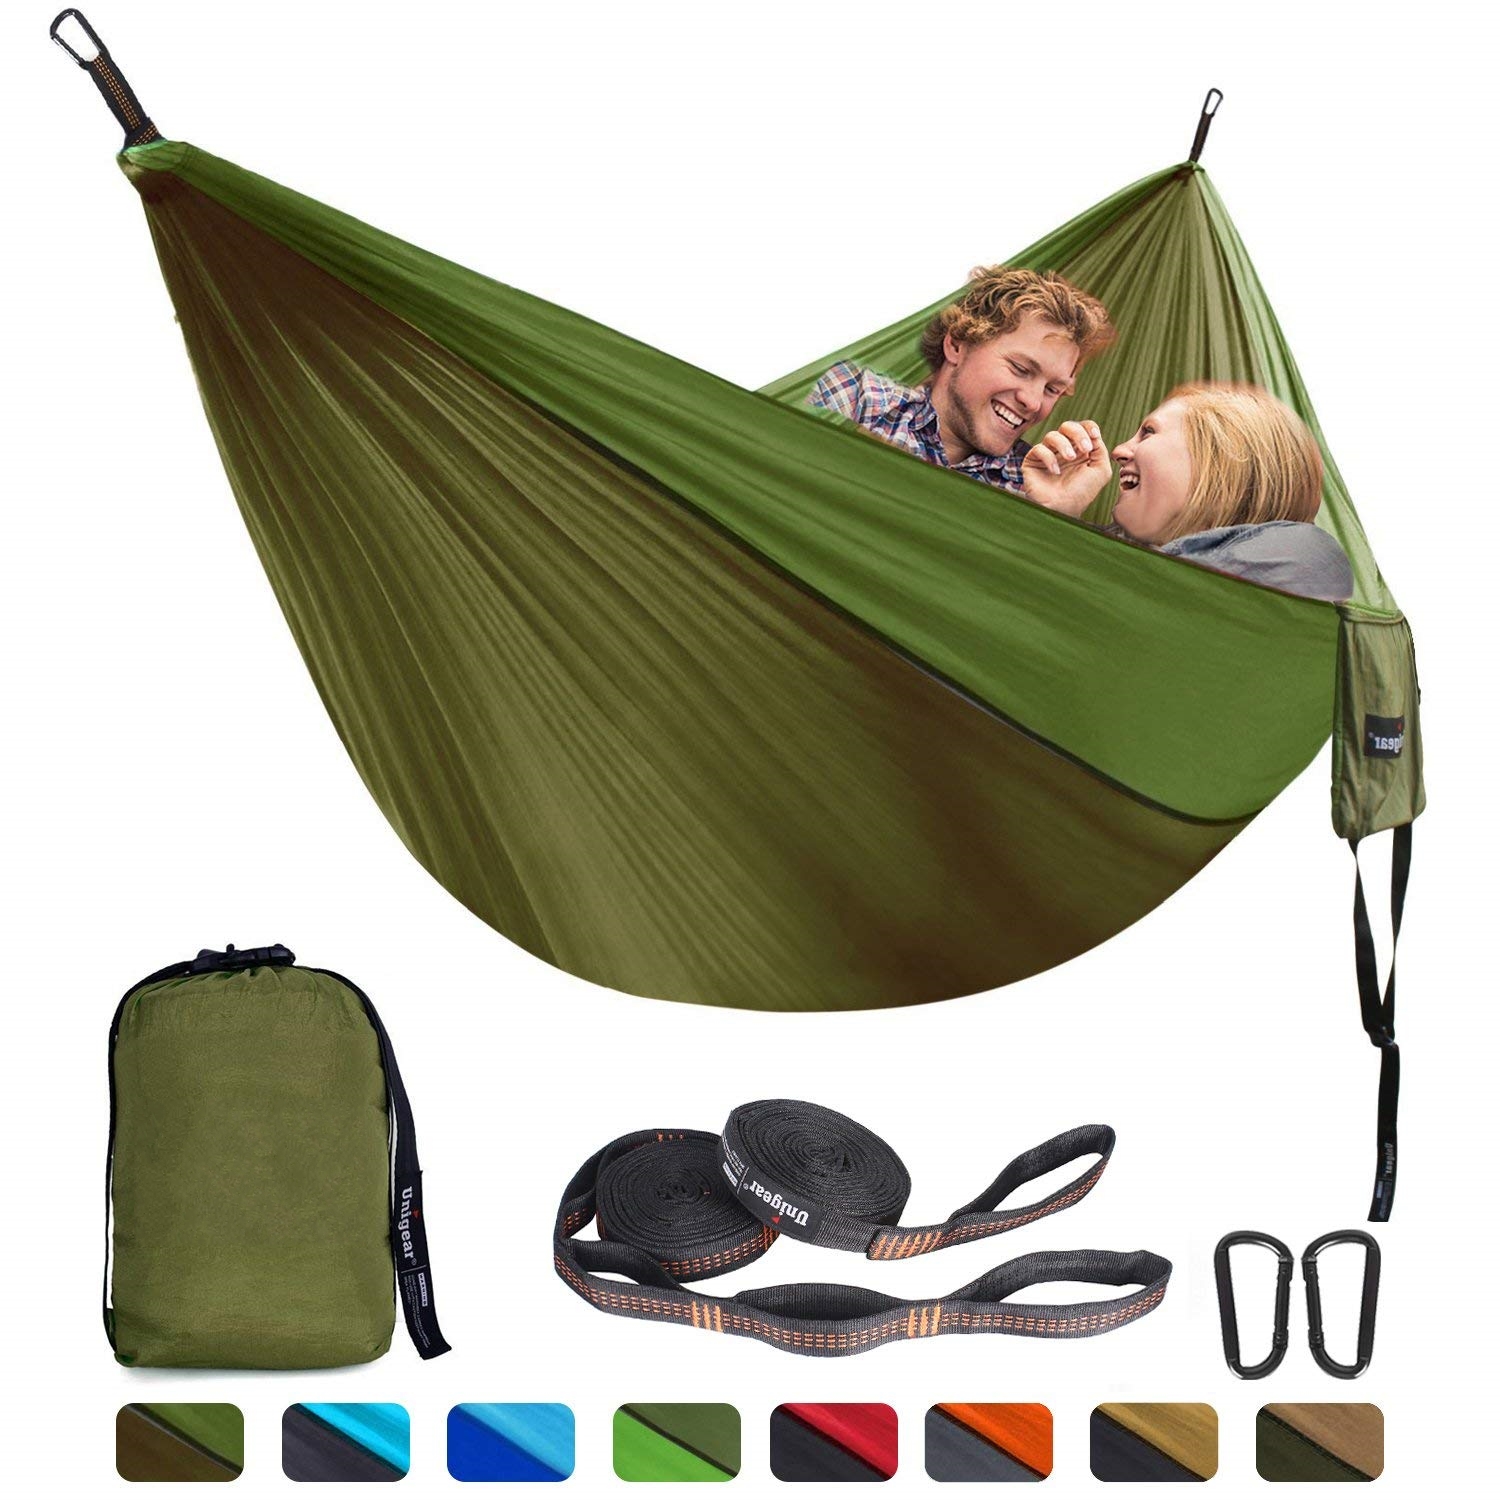 Hammock Portable Two Person Parachute Nylon Strong & Lightweight 